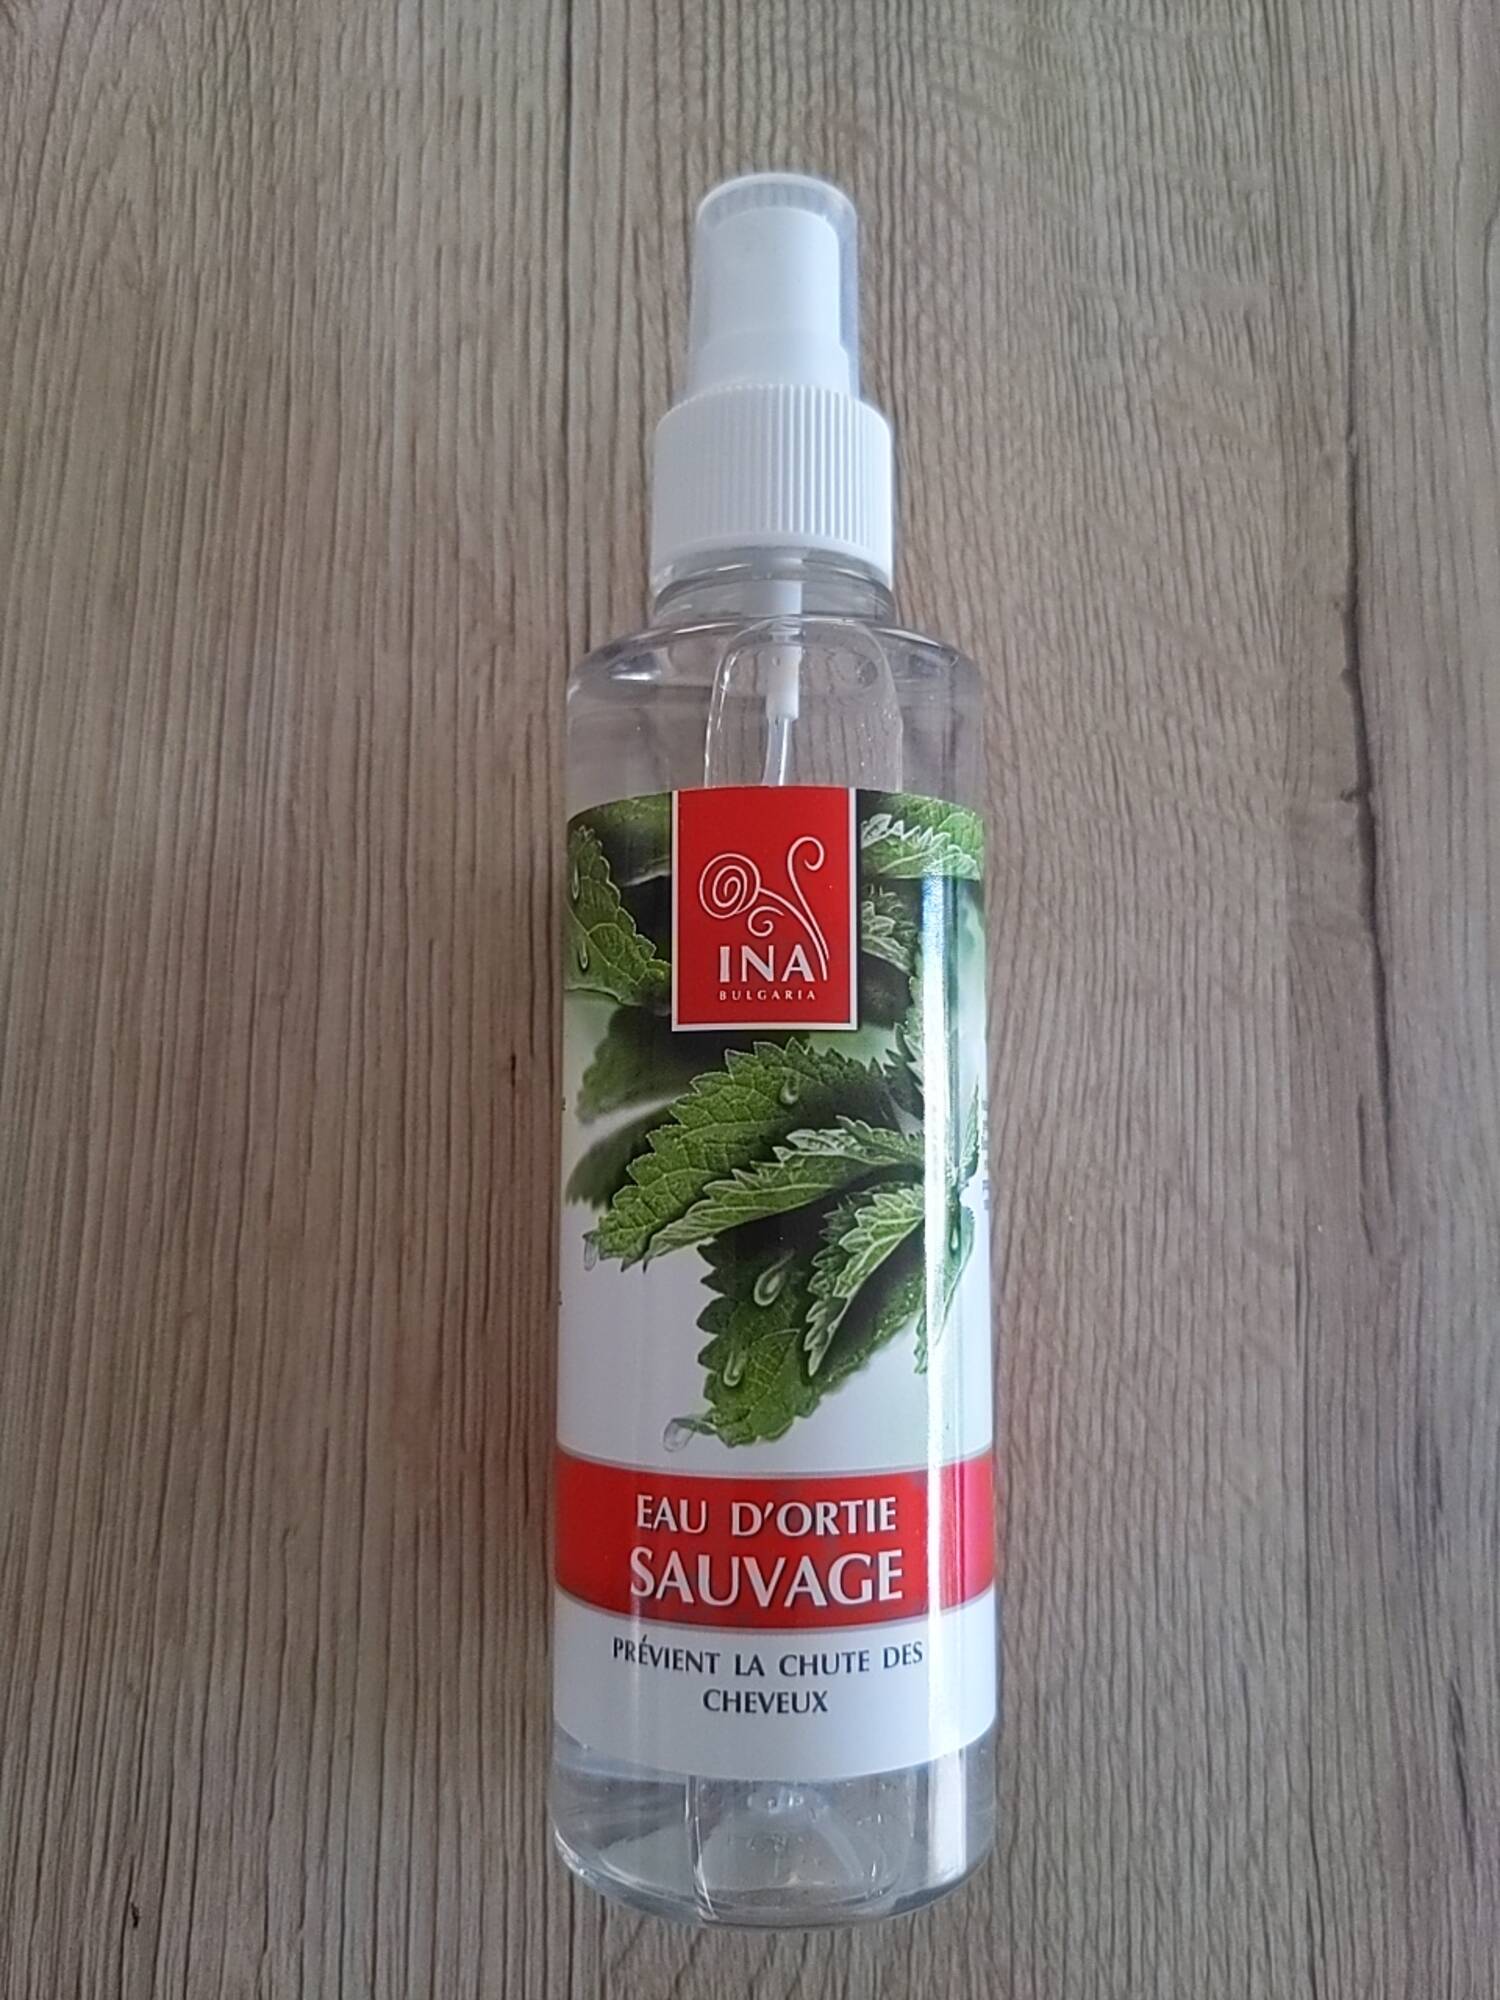 INA - Eau d'ortie sauvage